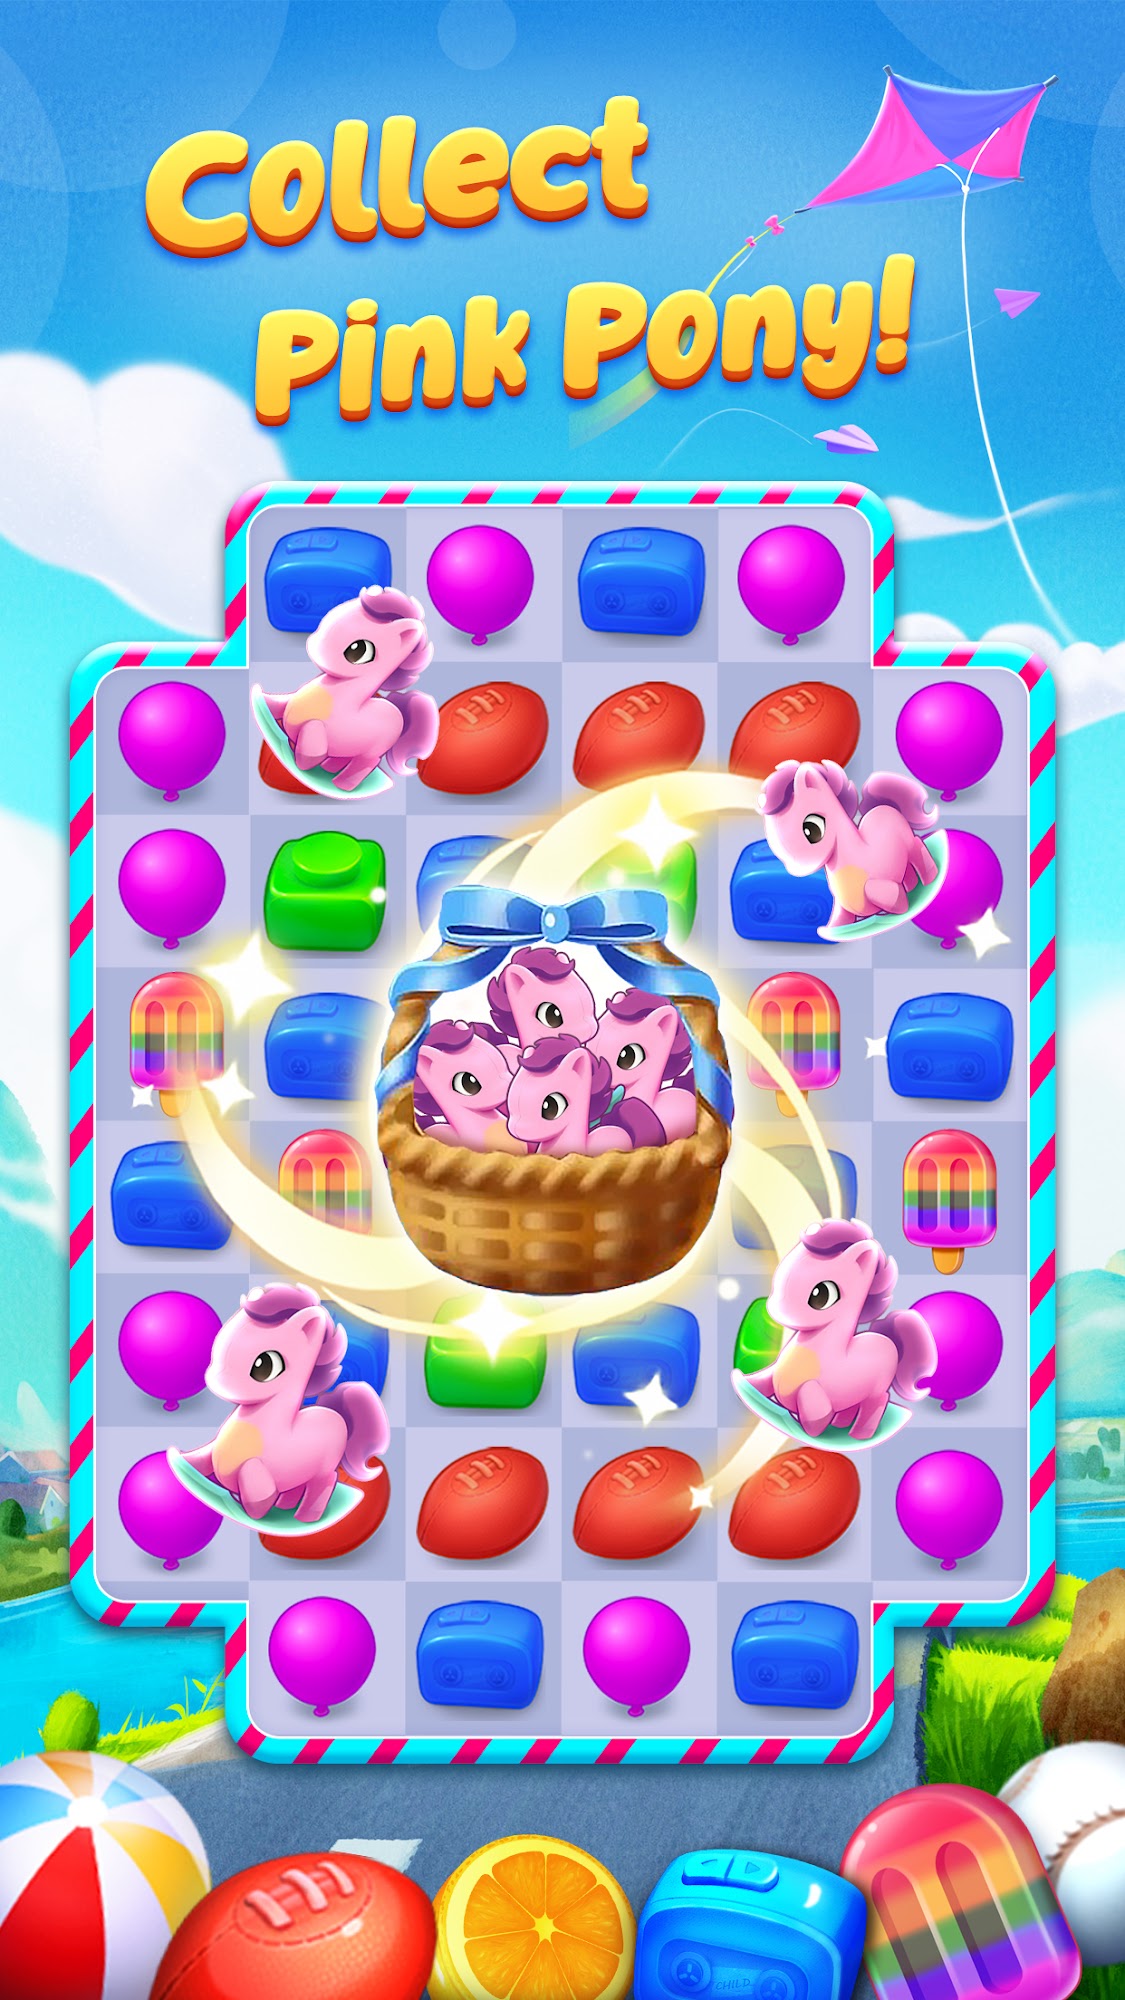 Best Friends: Puzzle & Match - Android game screenshots.